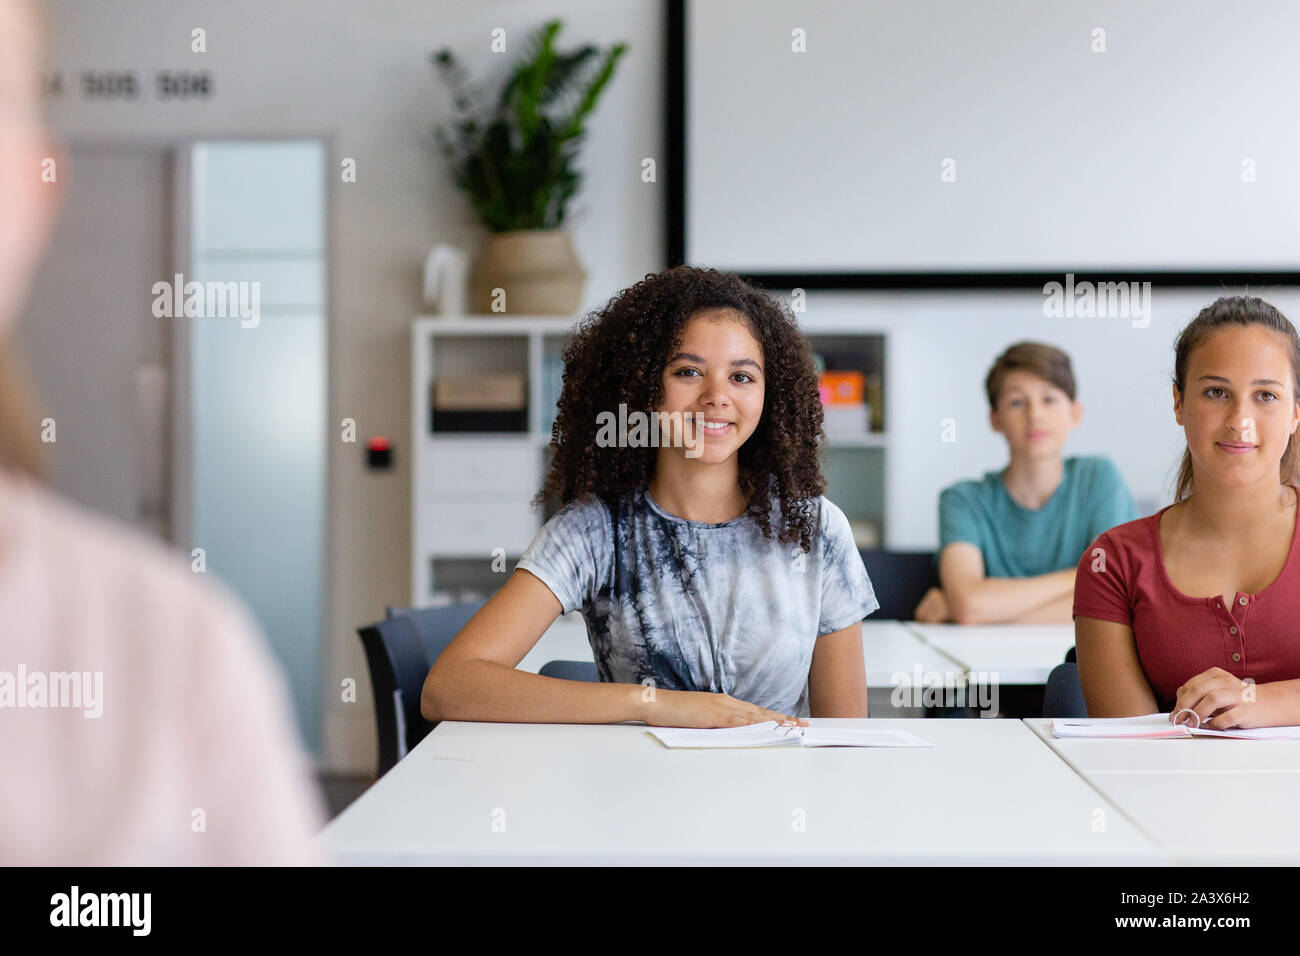 Portrait of female high school student in class Banque D'Images